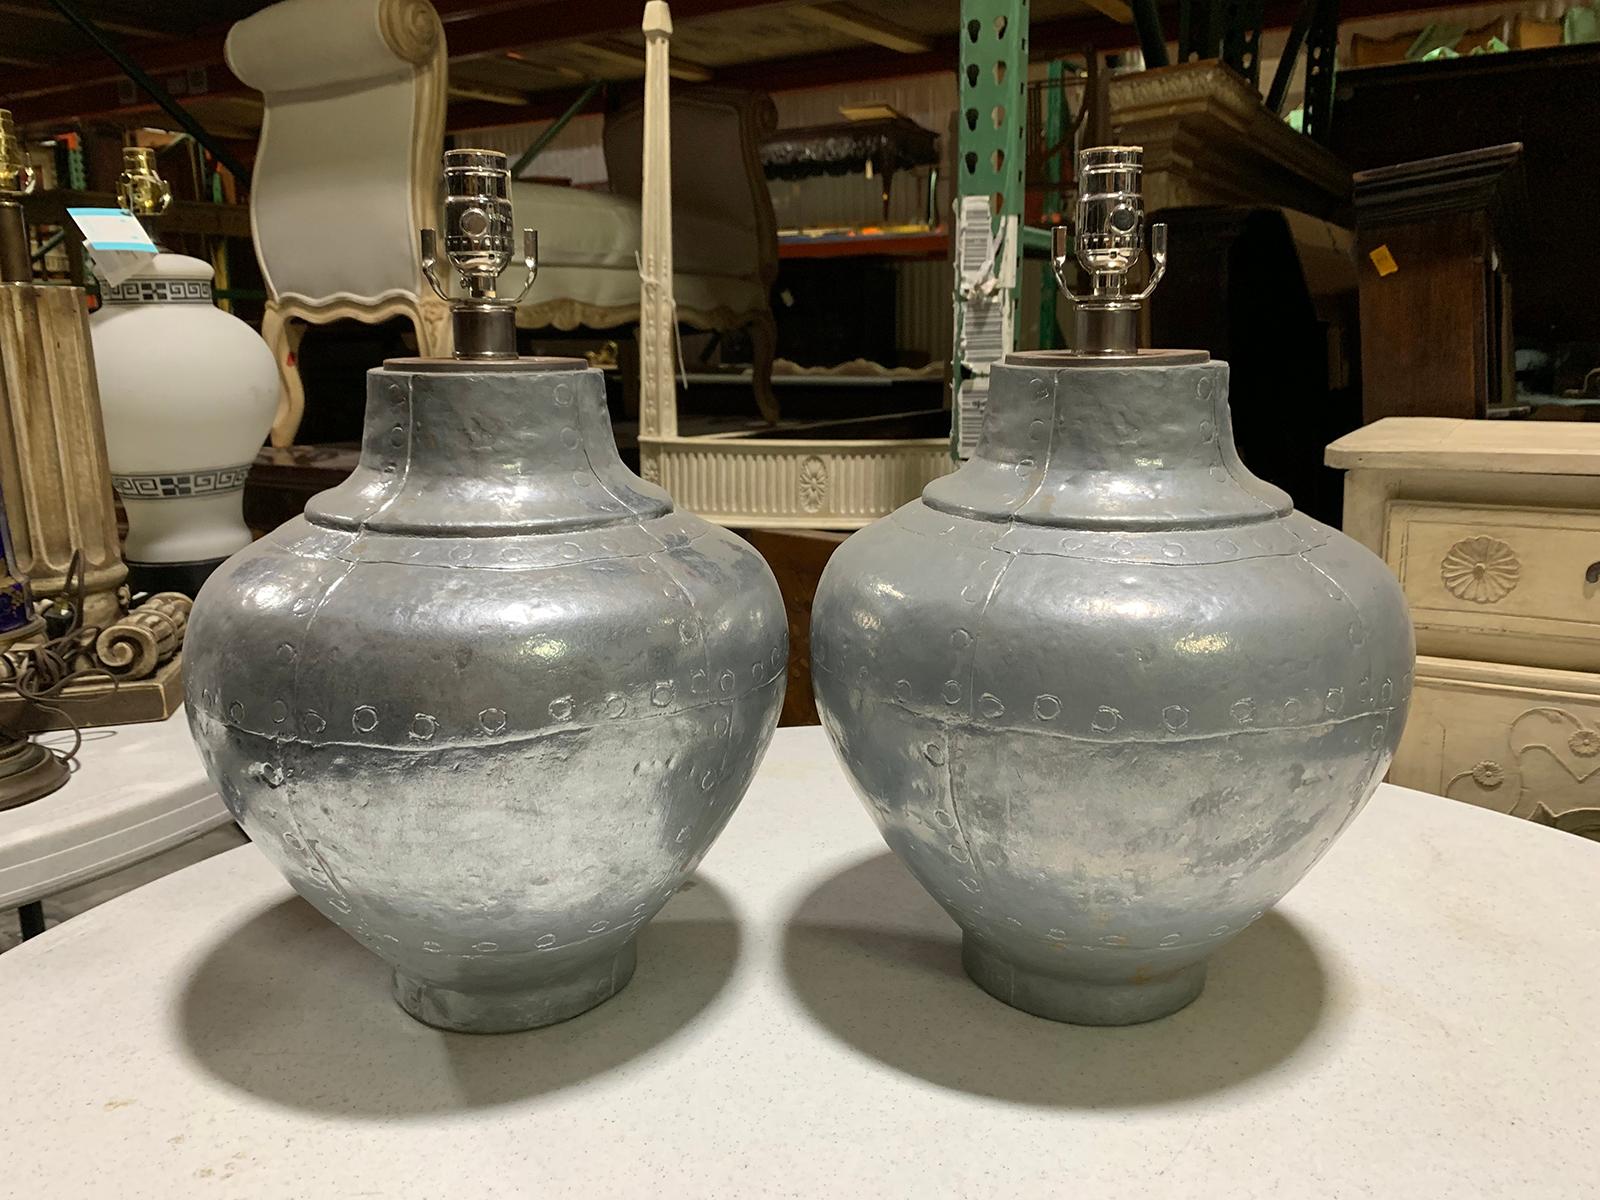 Pair of mid-20th century faux riveted metal ginger jar form lamps
New wiring.